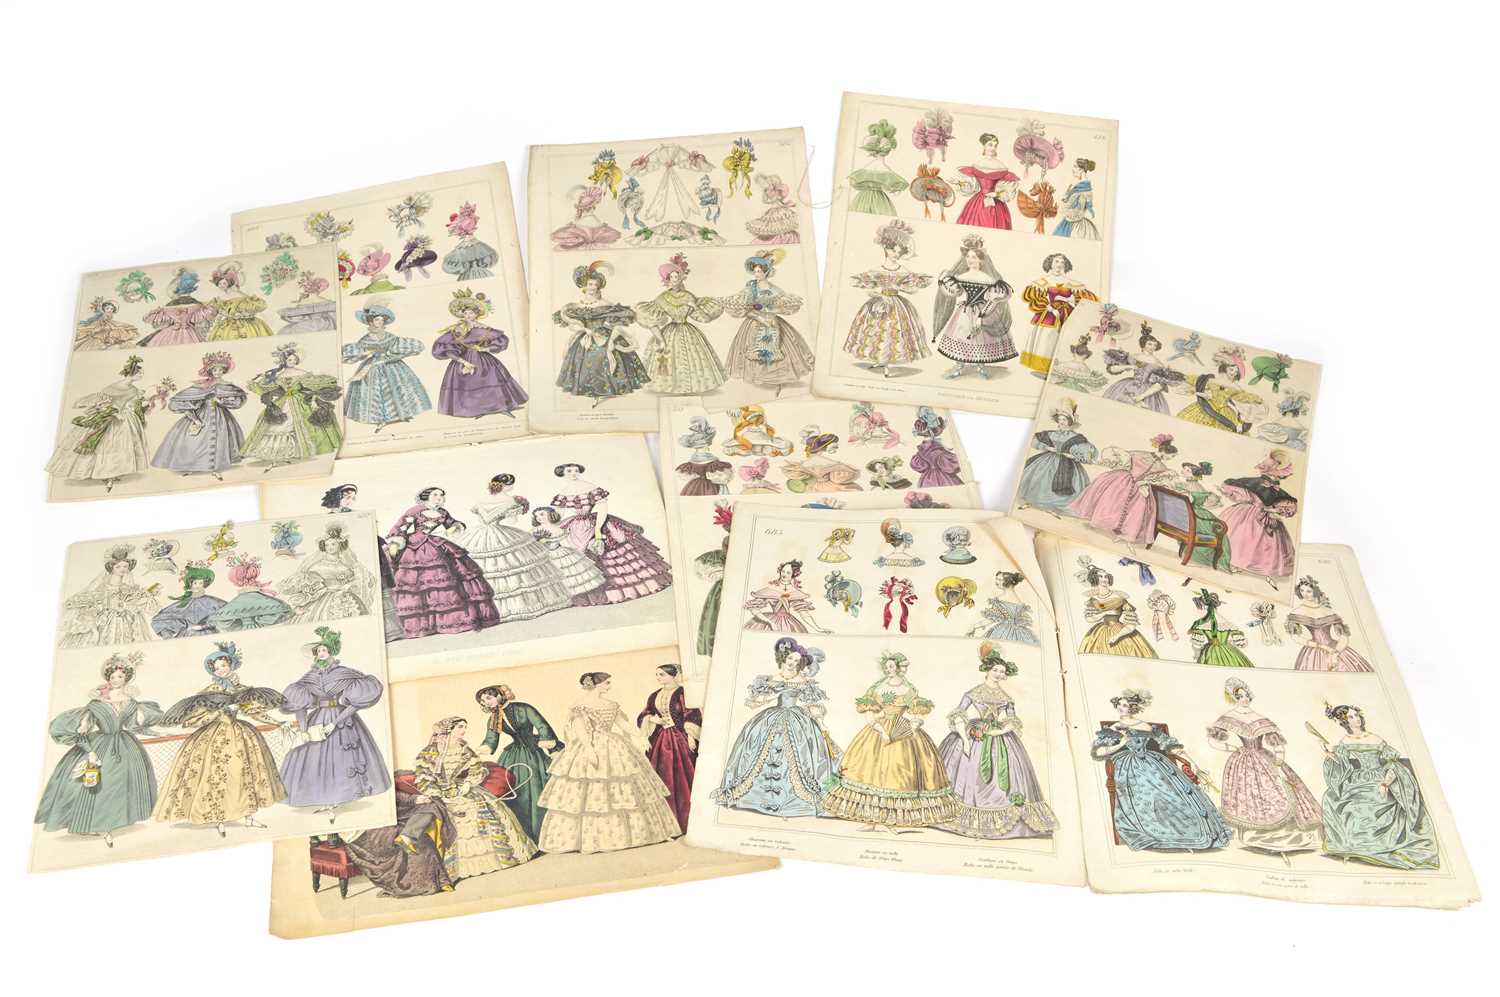 14 hand-coloured plates from Townsend's Monthly Selection of Parisian Costumes